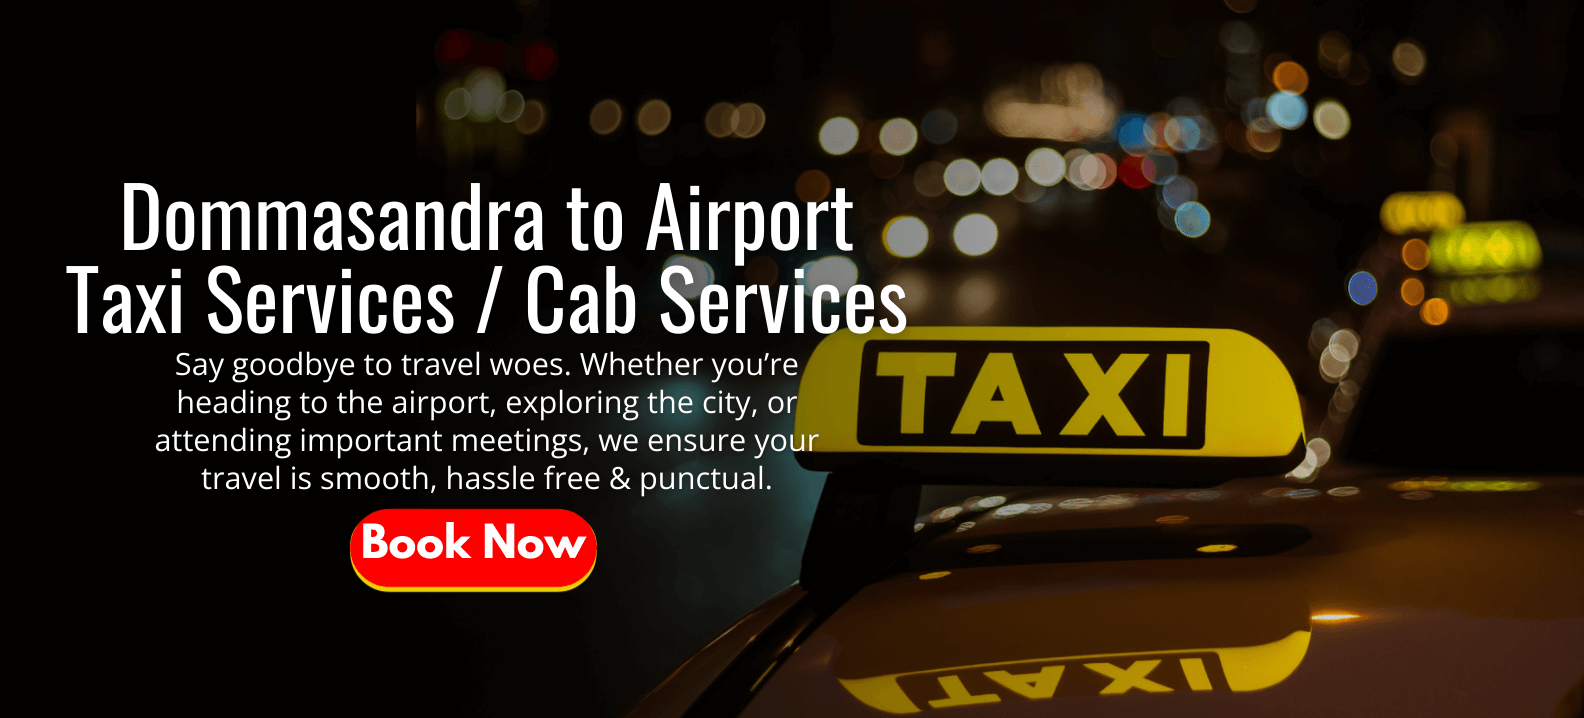 Dommasandra to Airport Taxi Services _ Cab Services